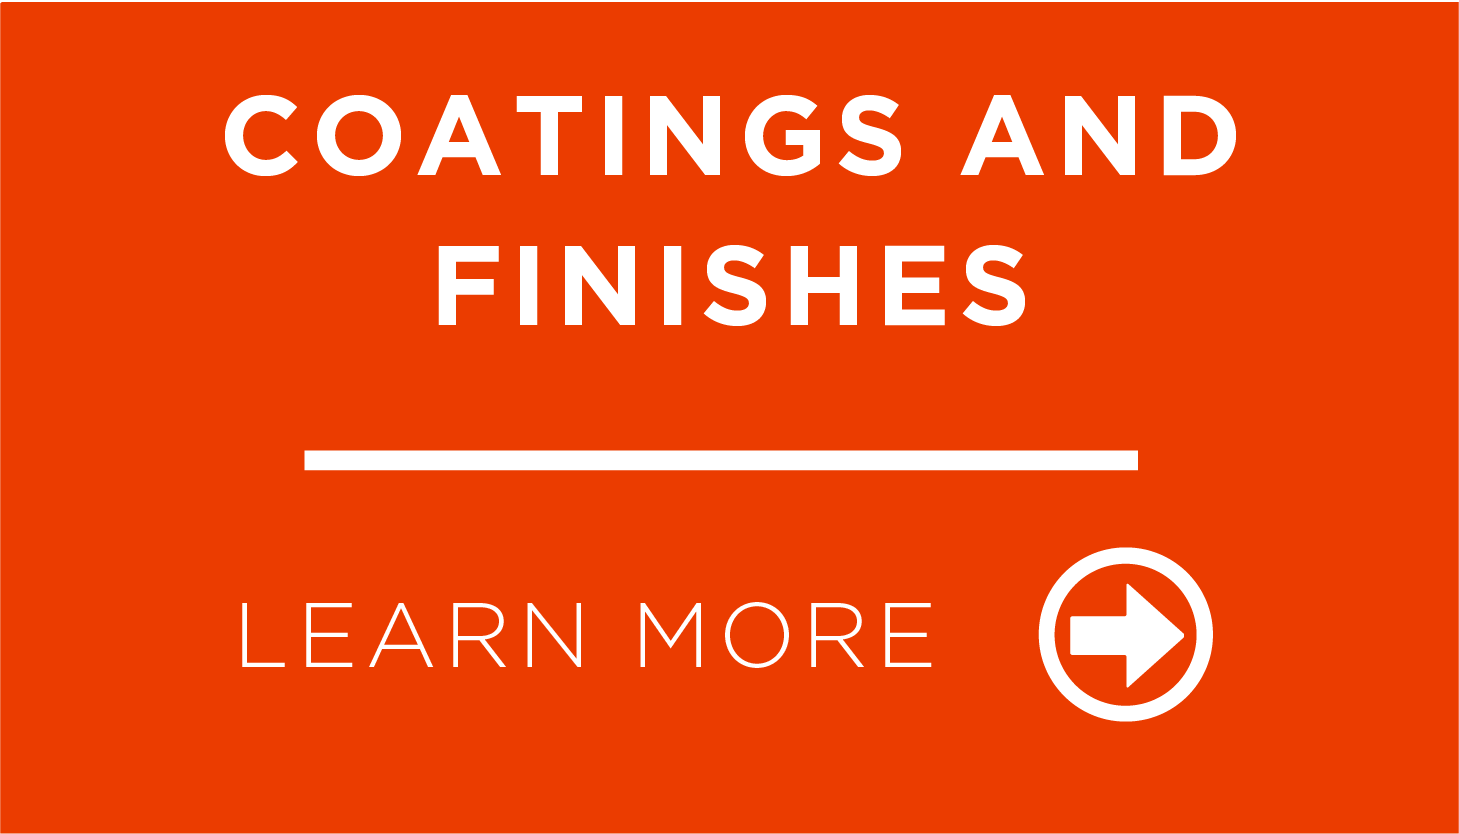 Coatings and Finishes